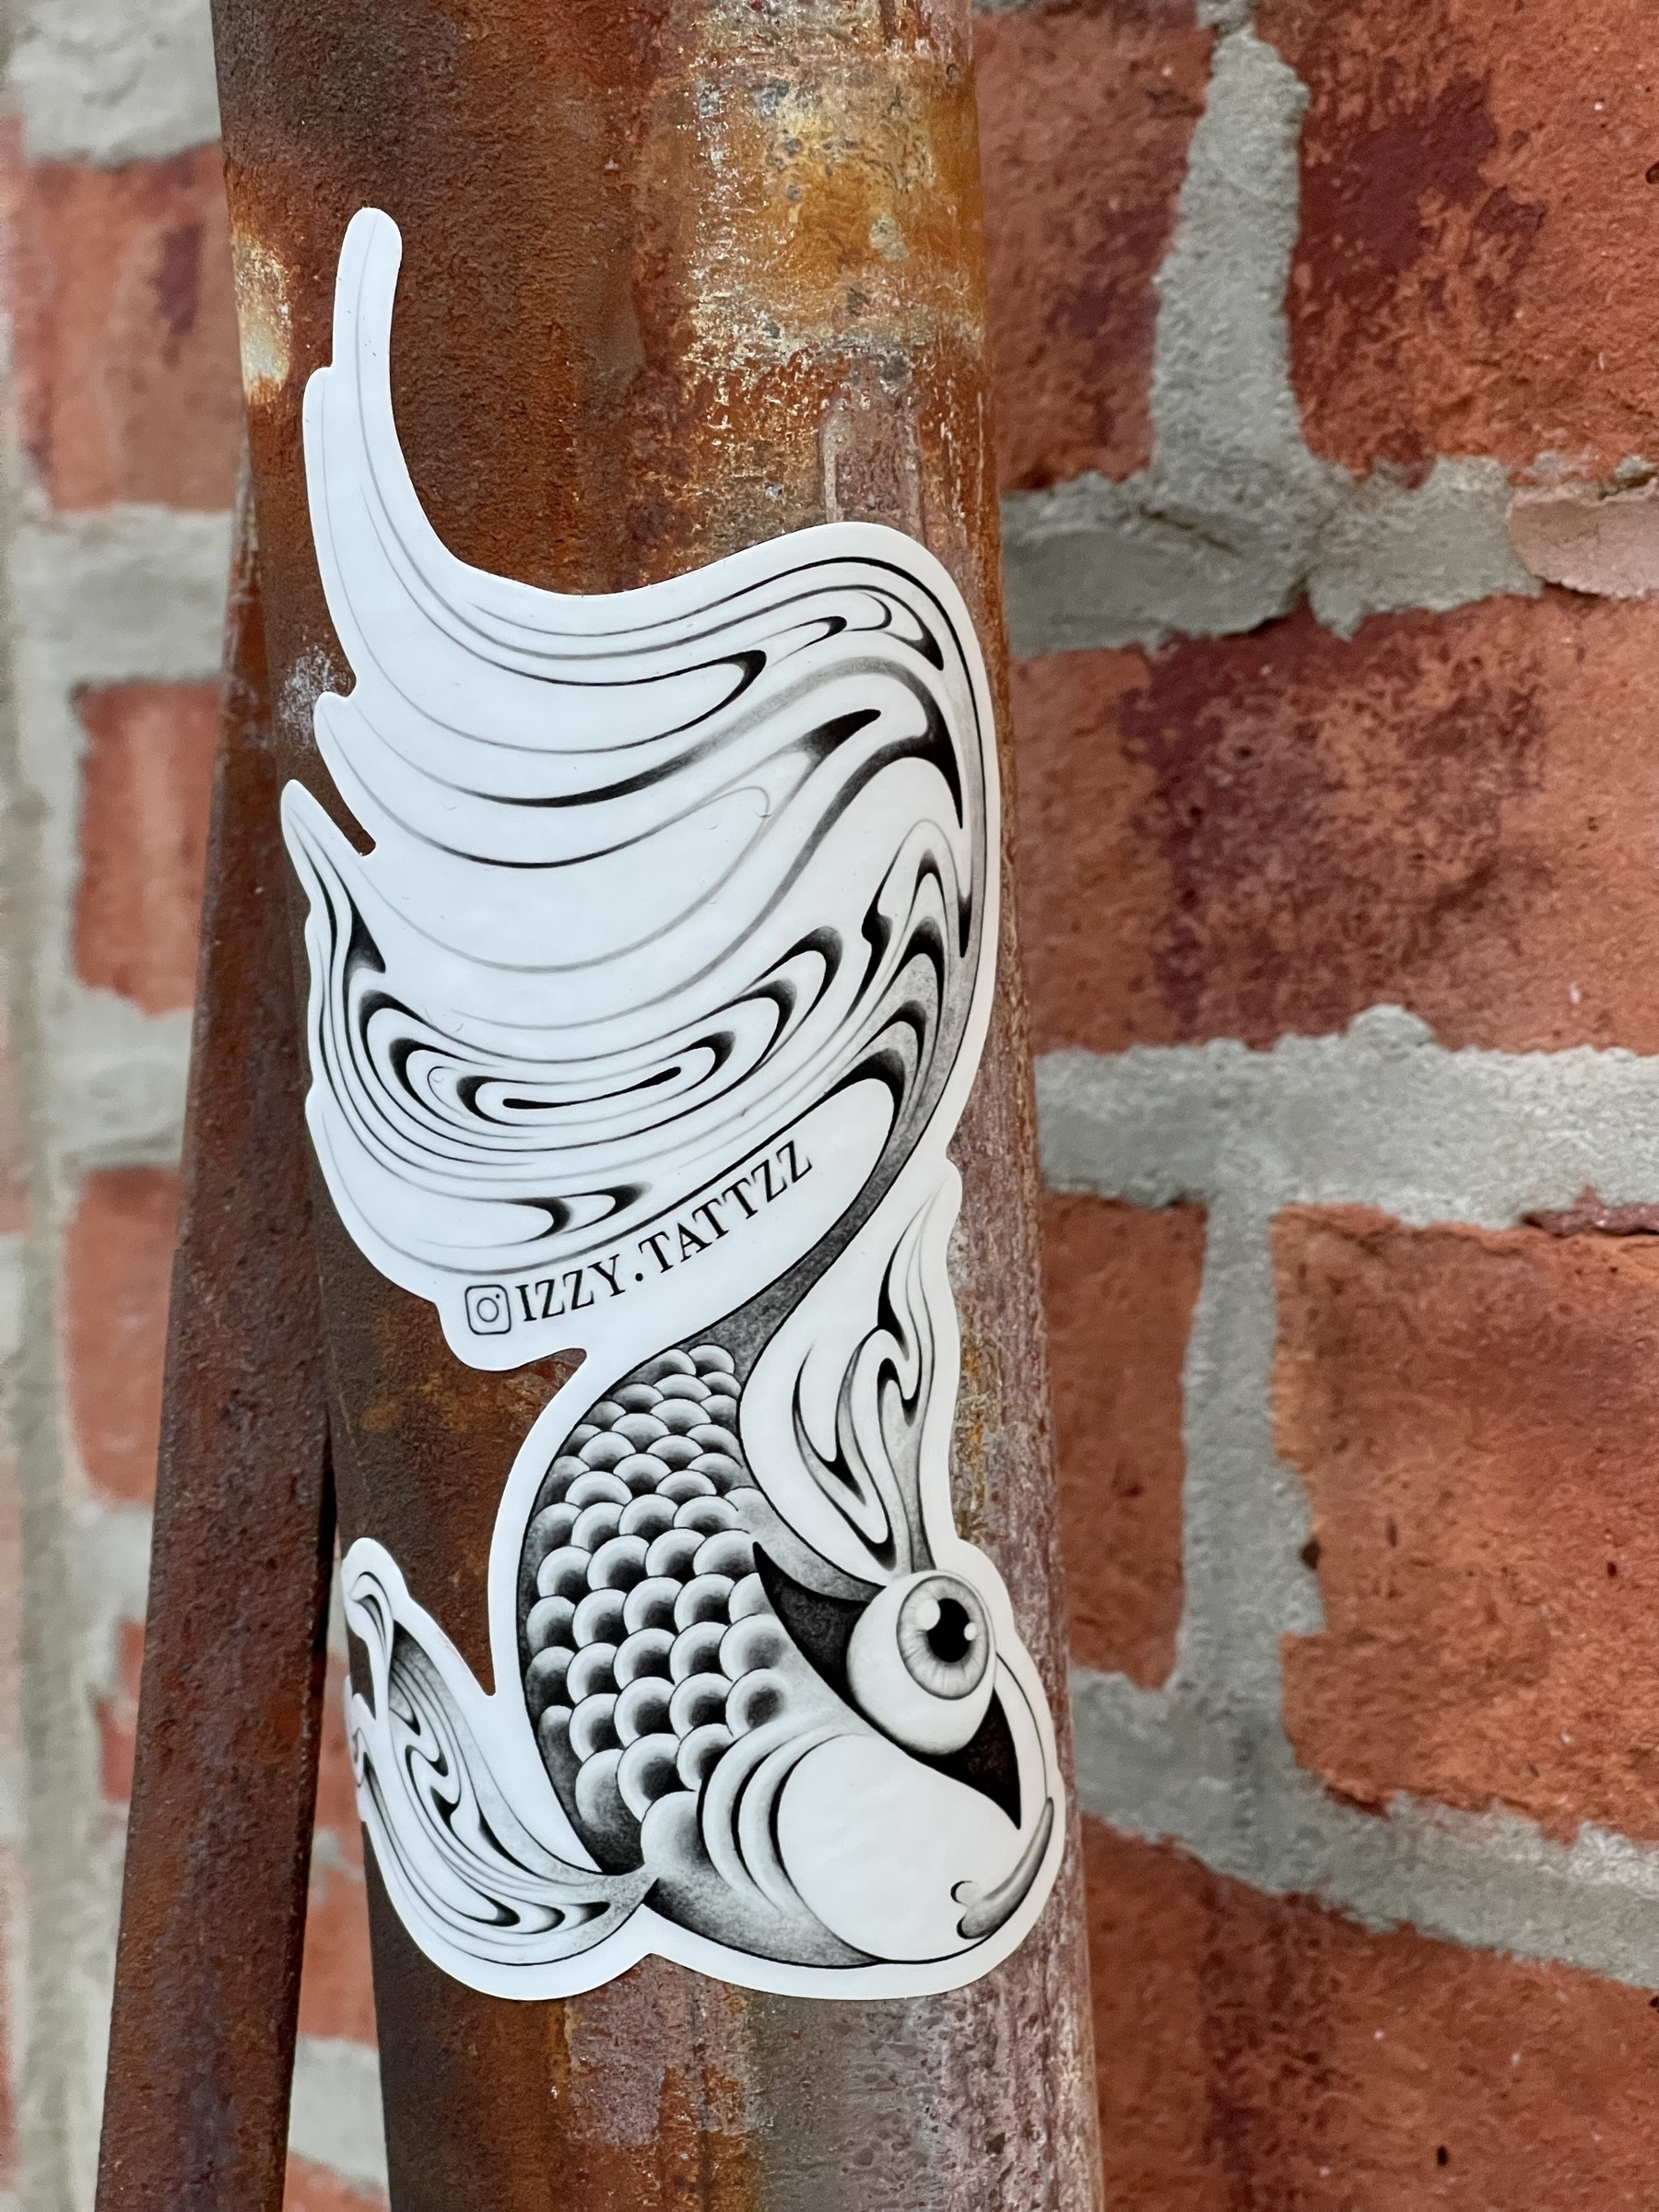 Sticker on an iron pipe for <a href="https://micro.blog/izzy">@izzy</a>